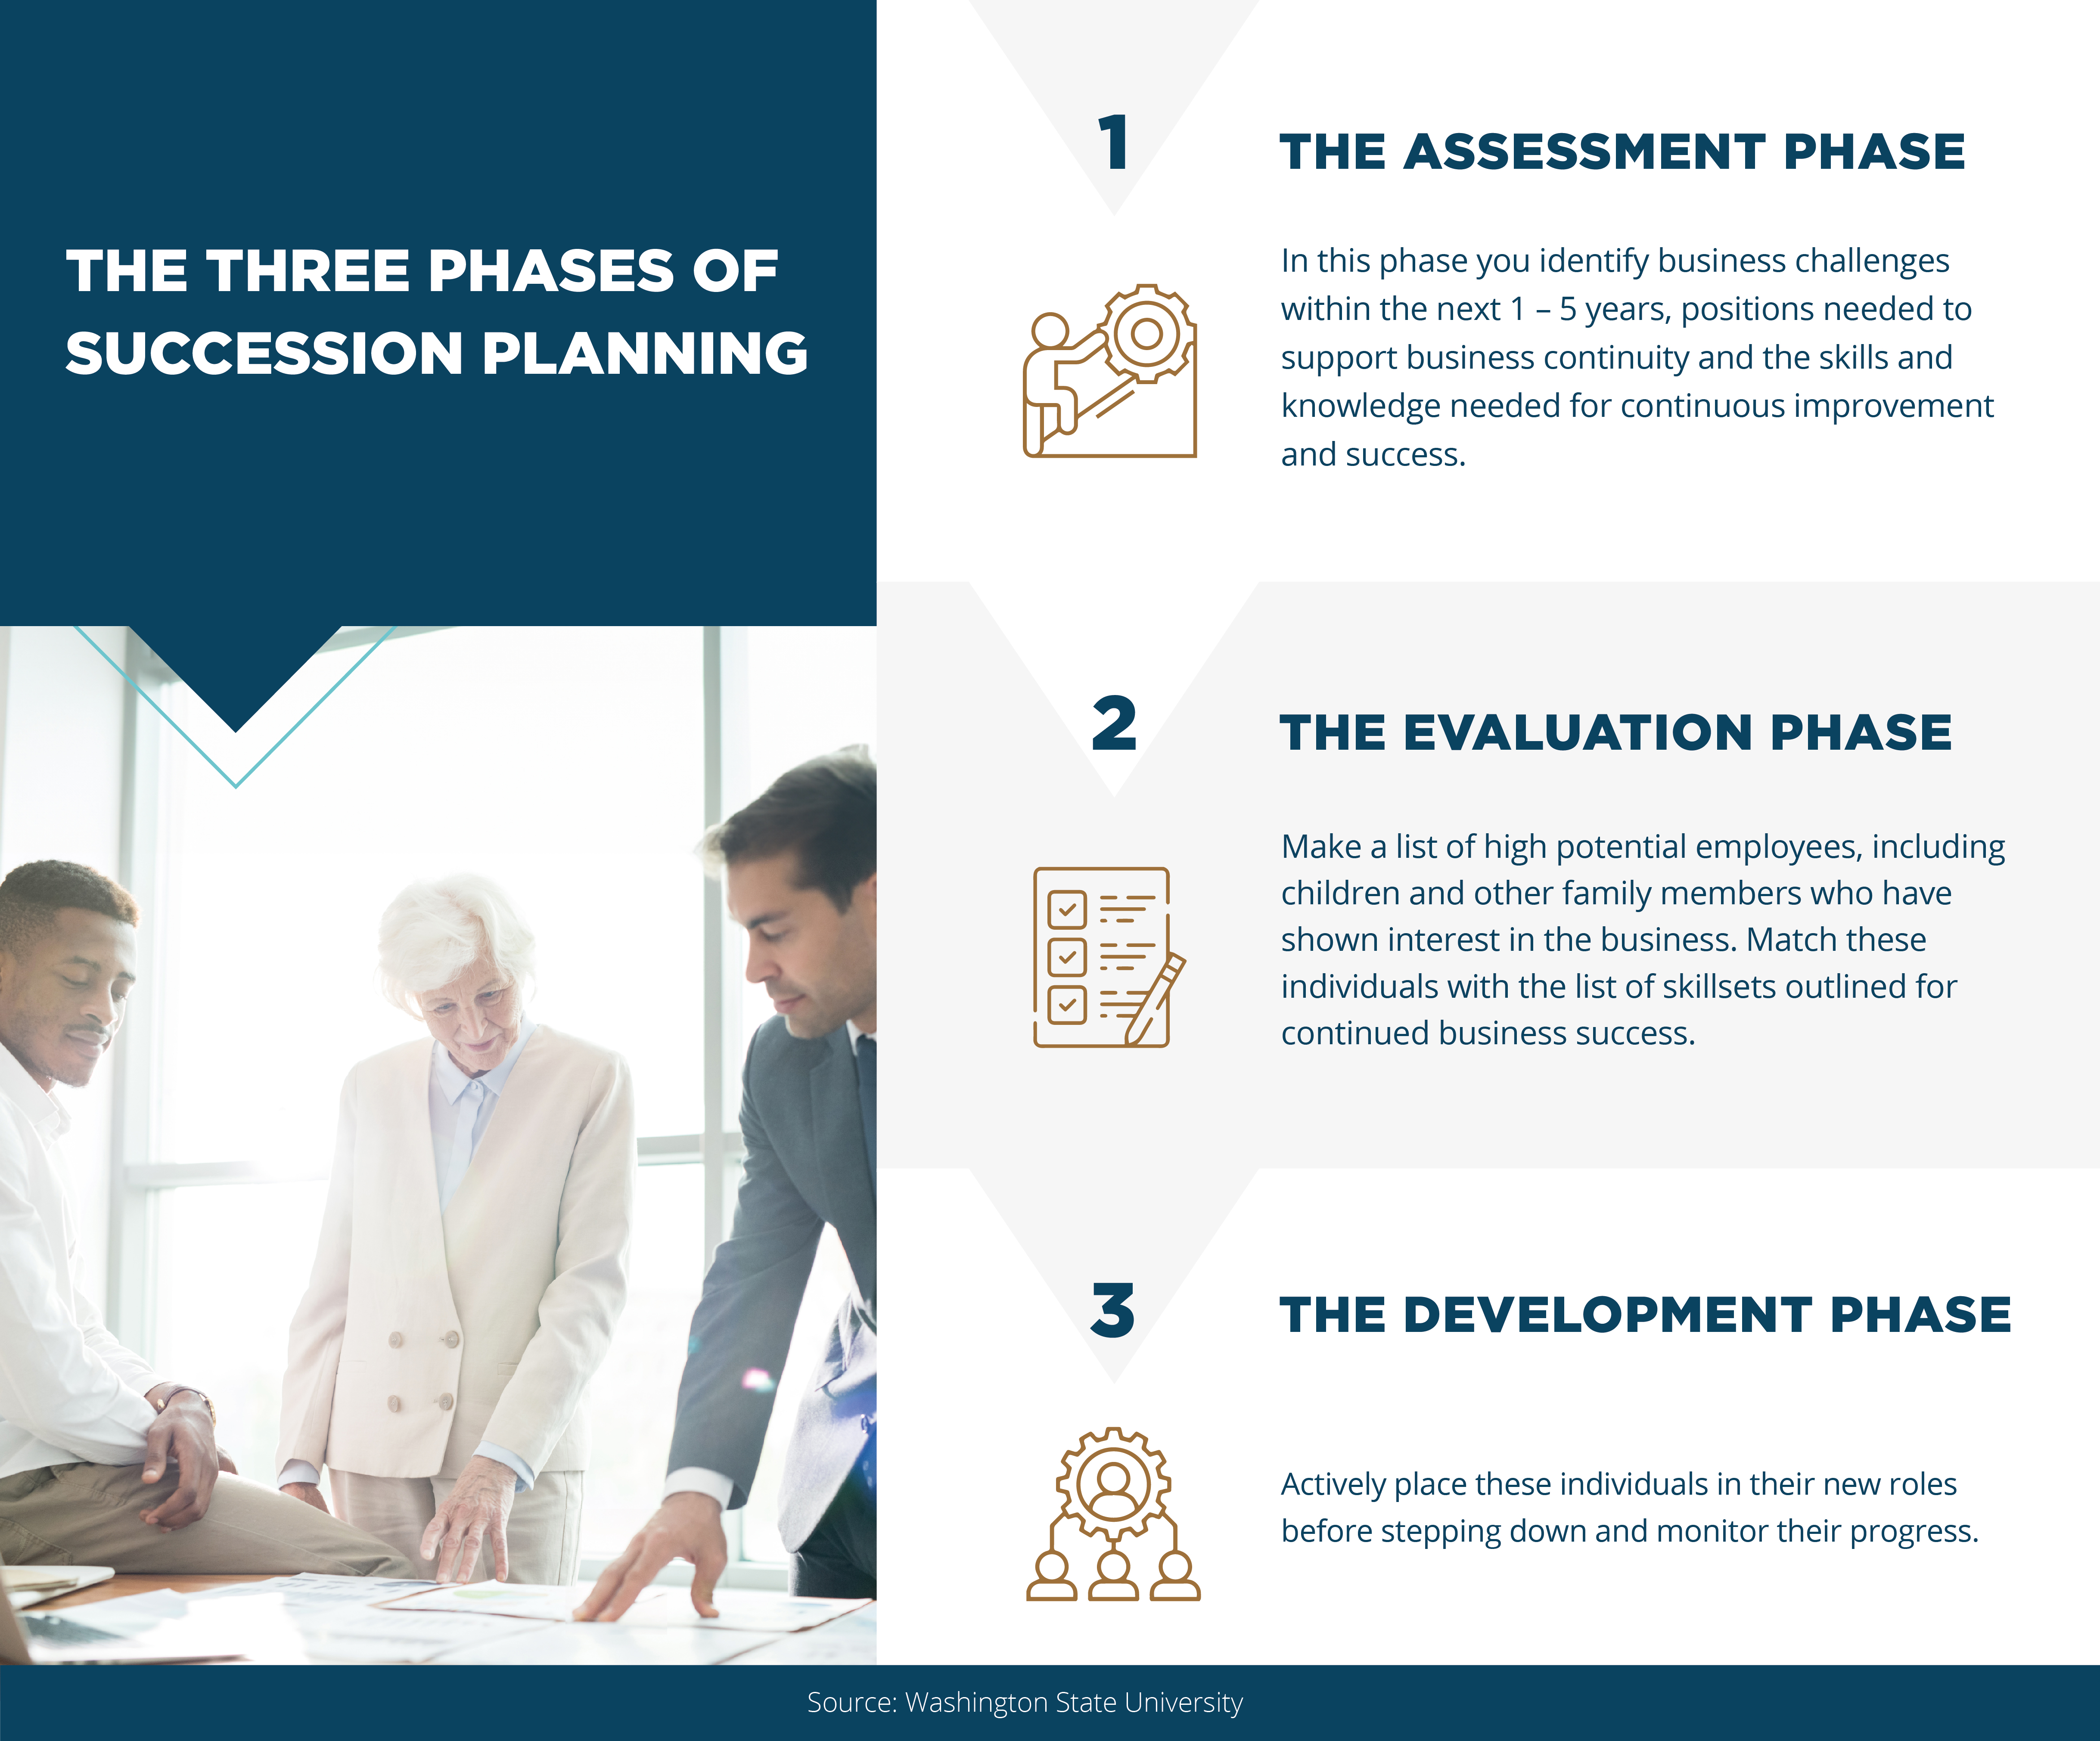 The three phases of succession planning for an organization